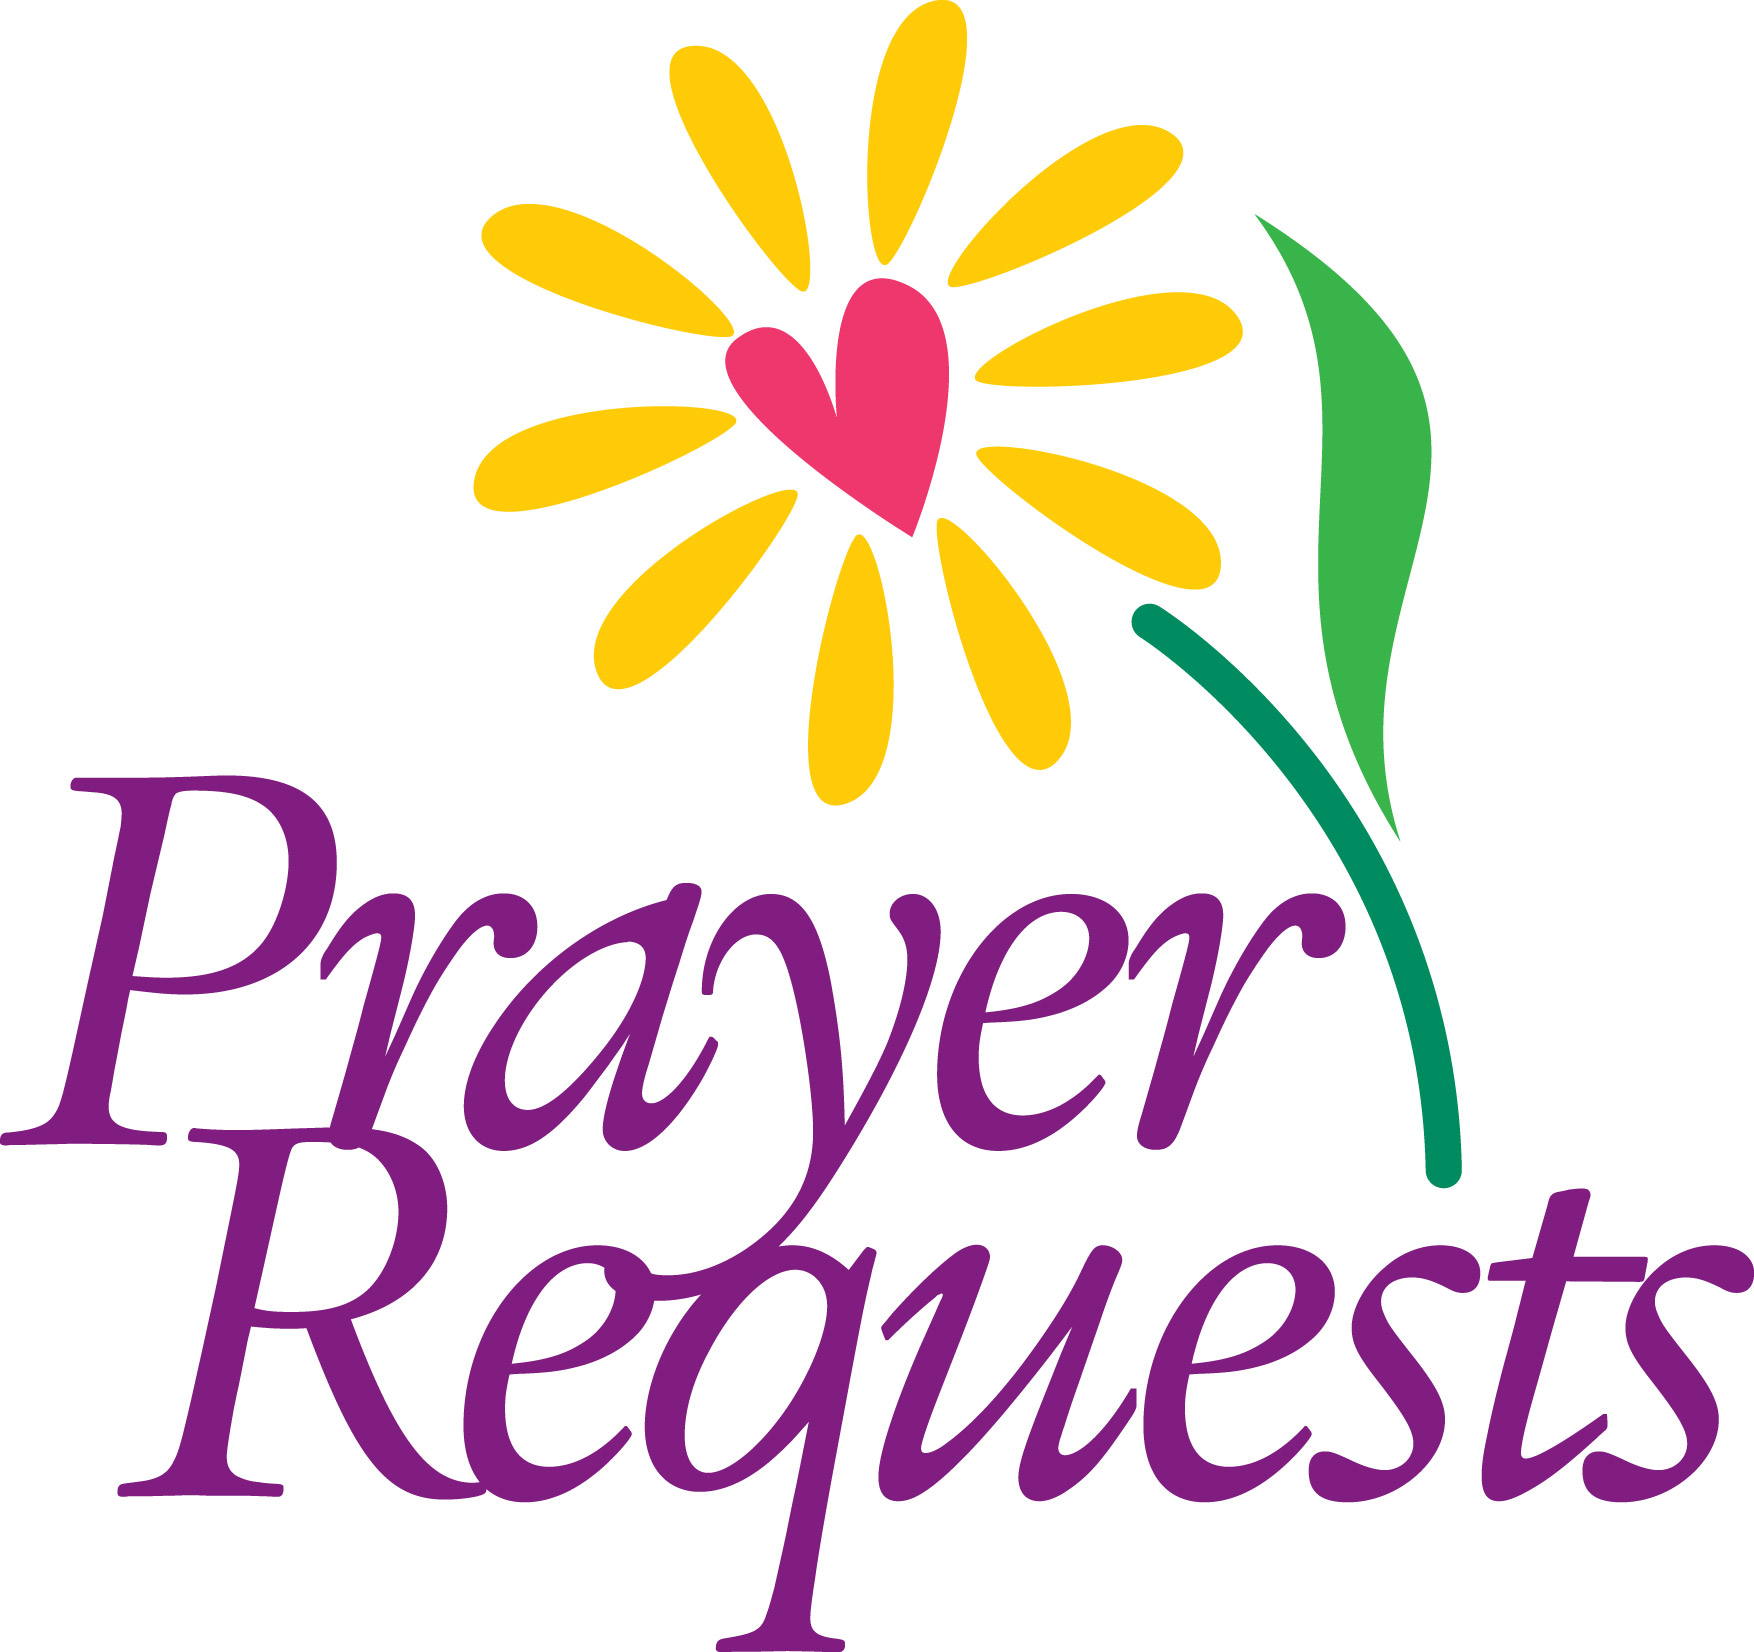 Free clipart images of prayer